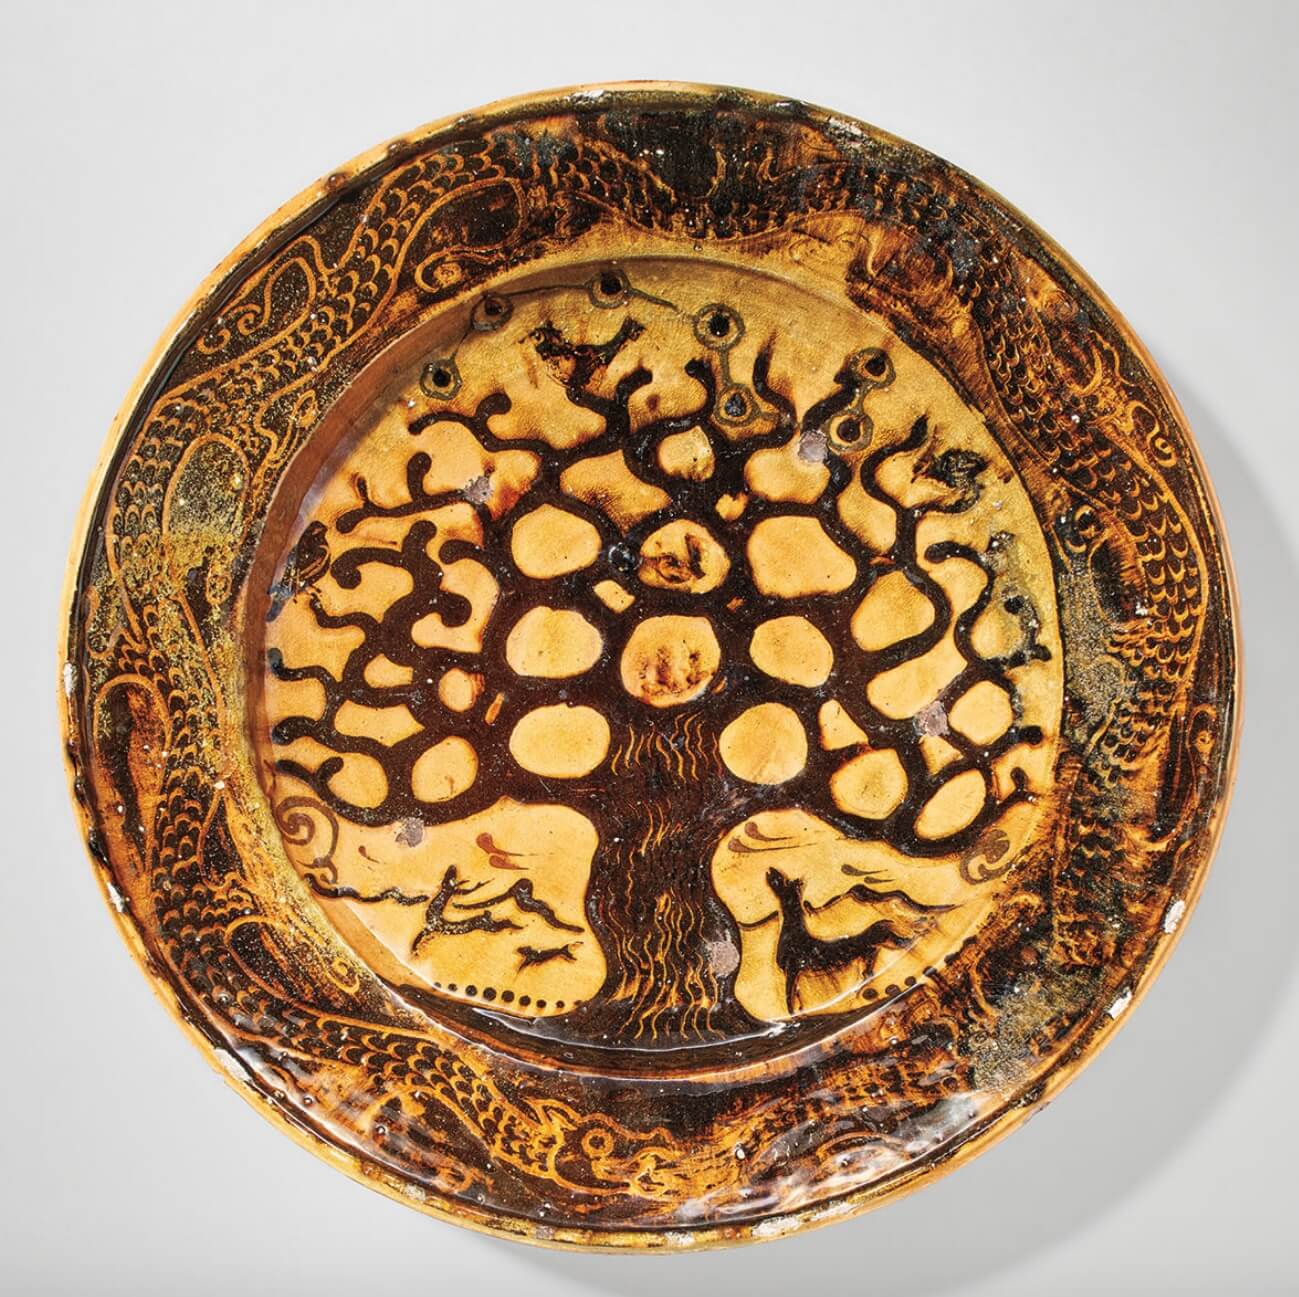 Marketplace | Leach Plate Fetches $130,000 in $8.8 Million Studio Pottery Auction